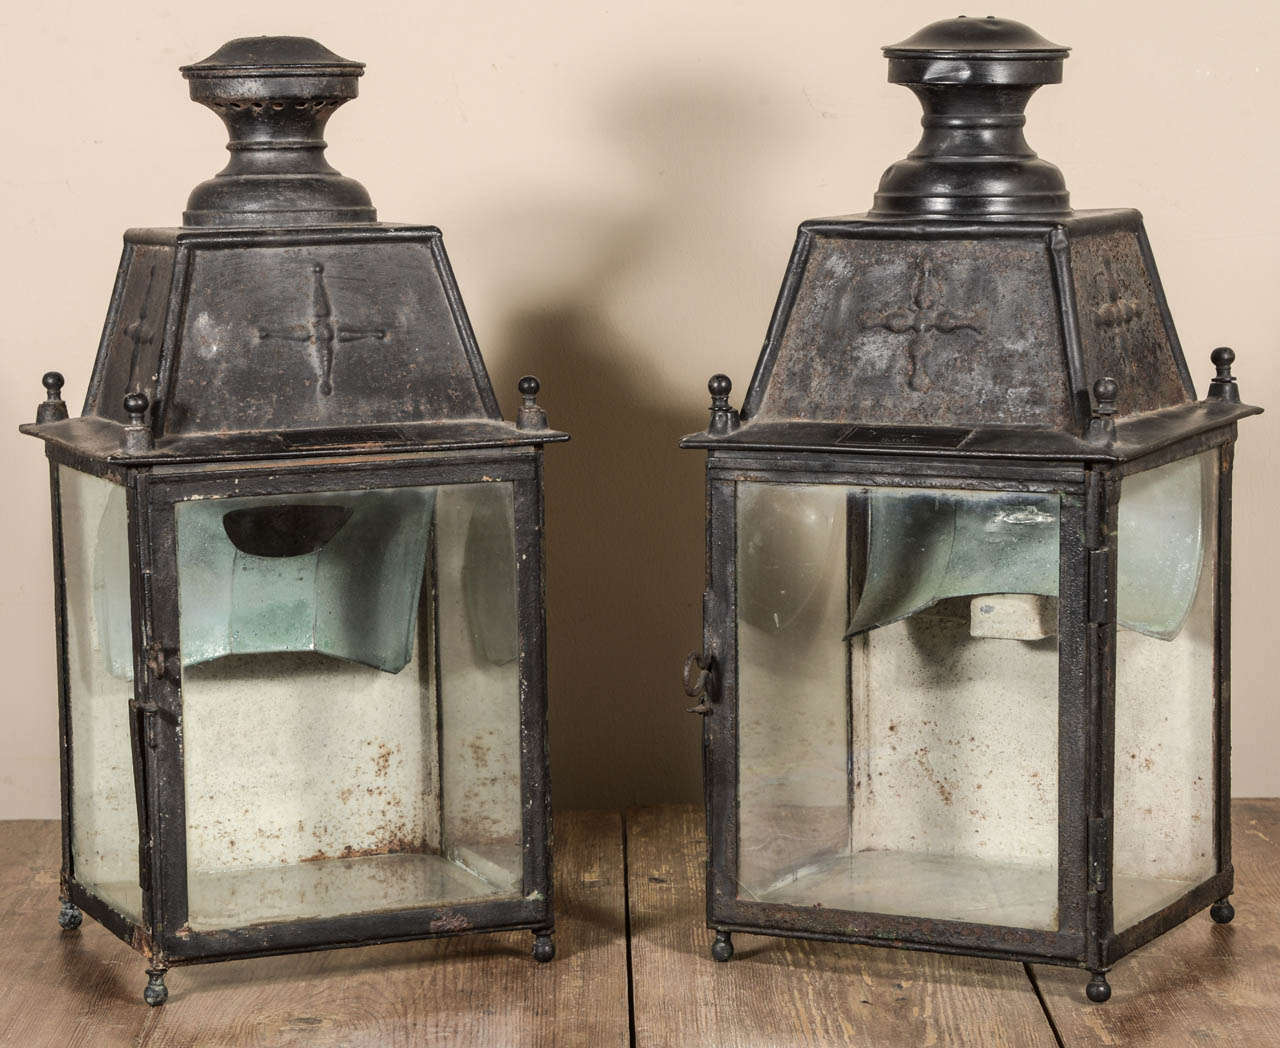 Pair of fine 19th century chemin de fer lanterns with original maker's label denoting the stations they served.